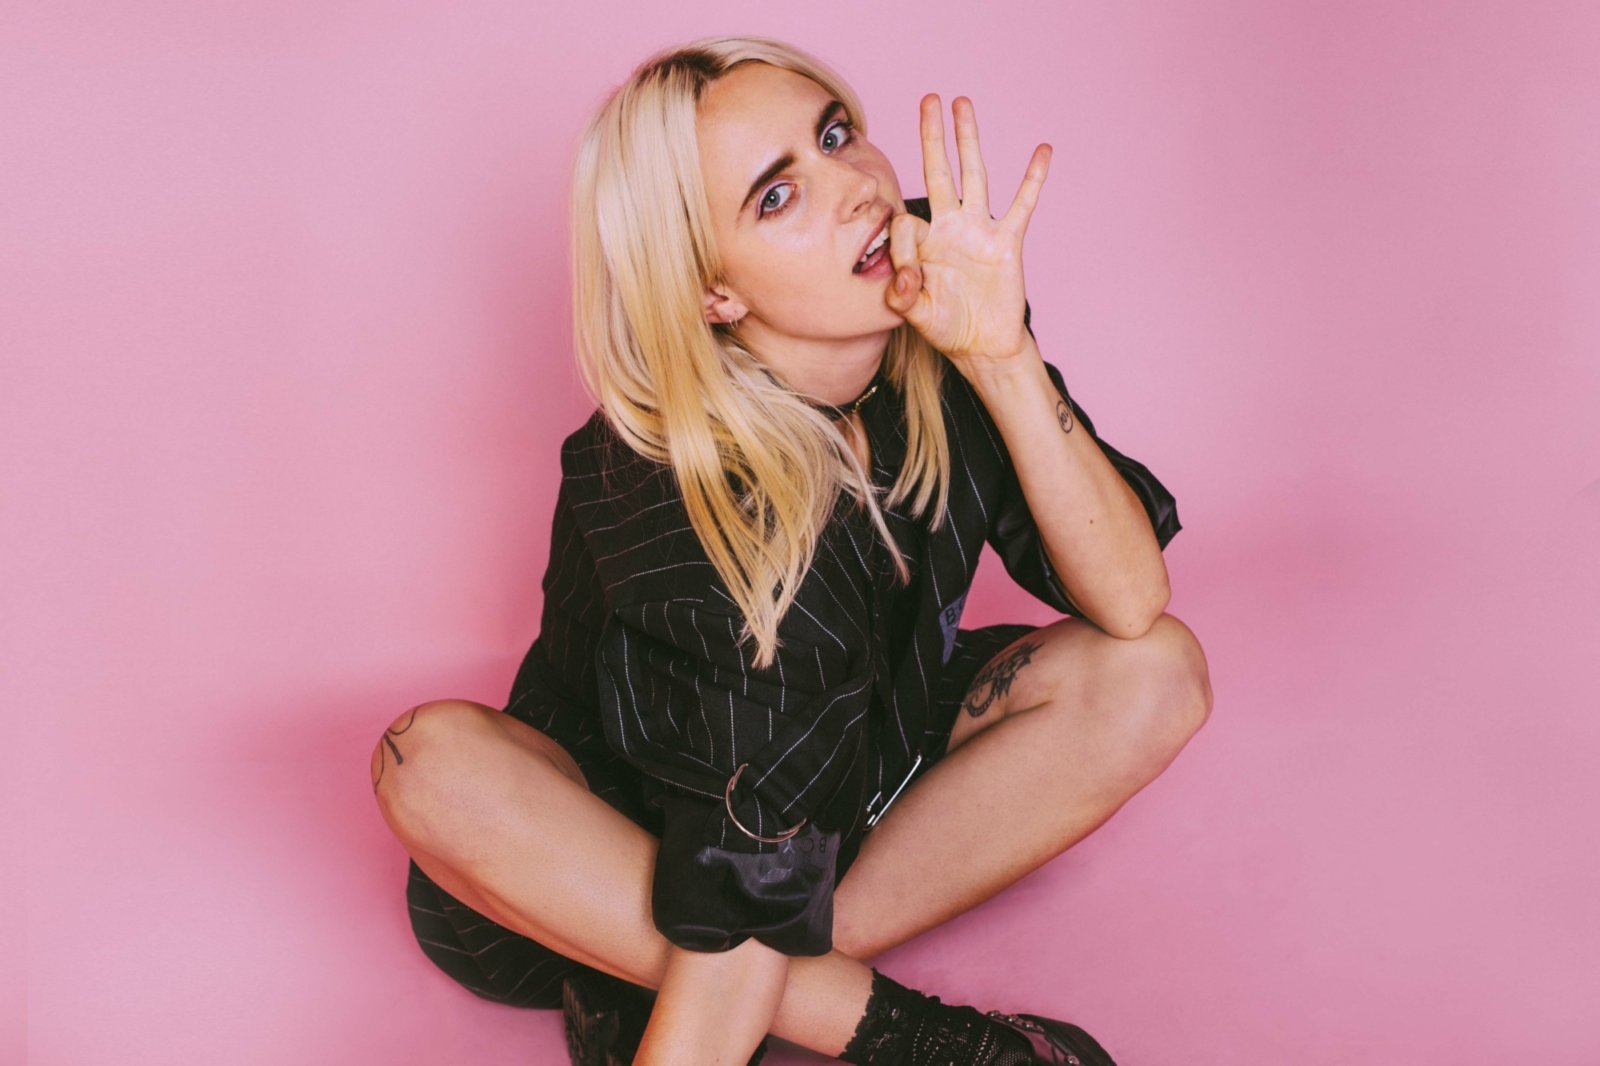 MØ teams up with Major Lazer and Justin Bieber for 'Cold Water'